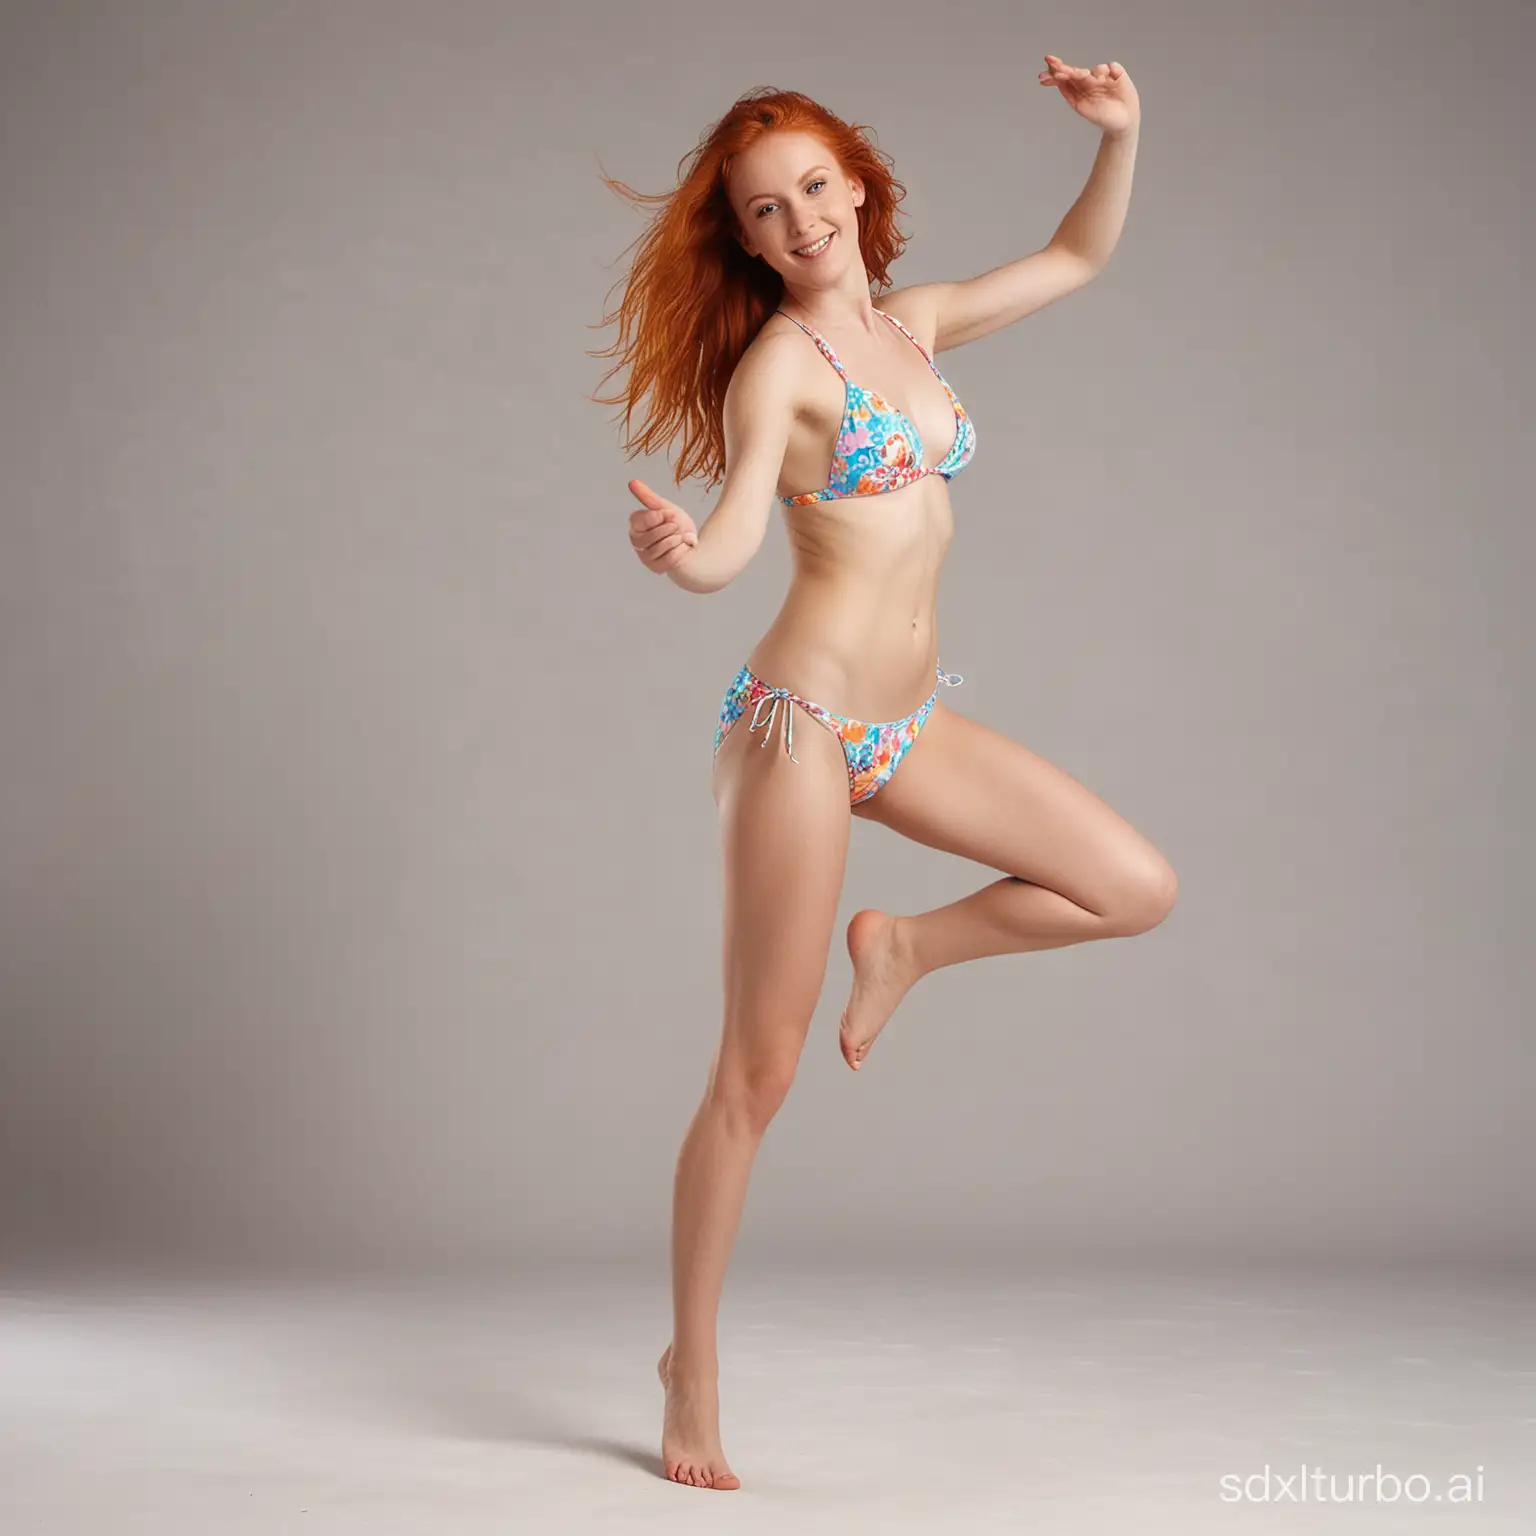 a young red-haired girl in a bikini, dancing and skipping